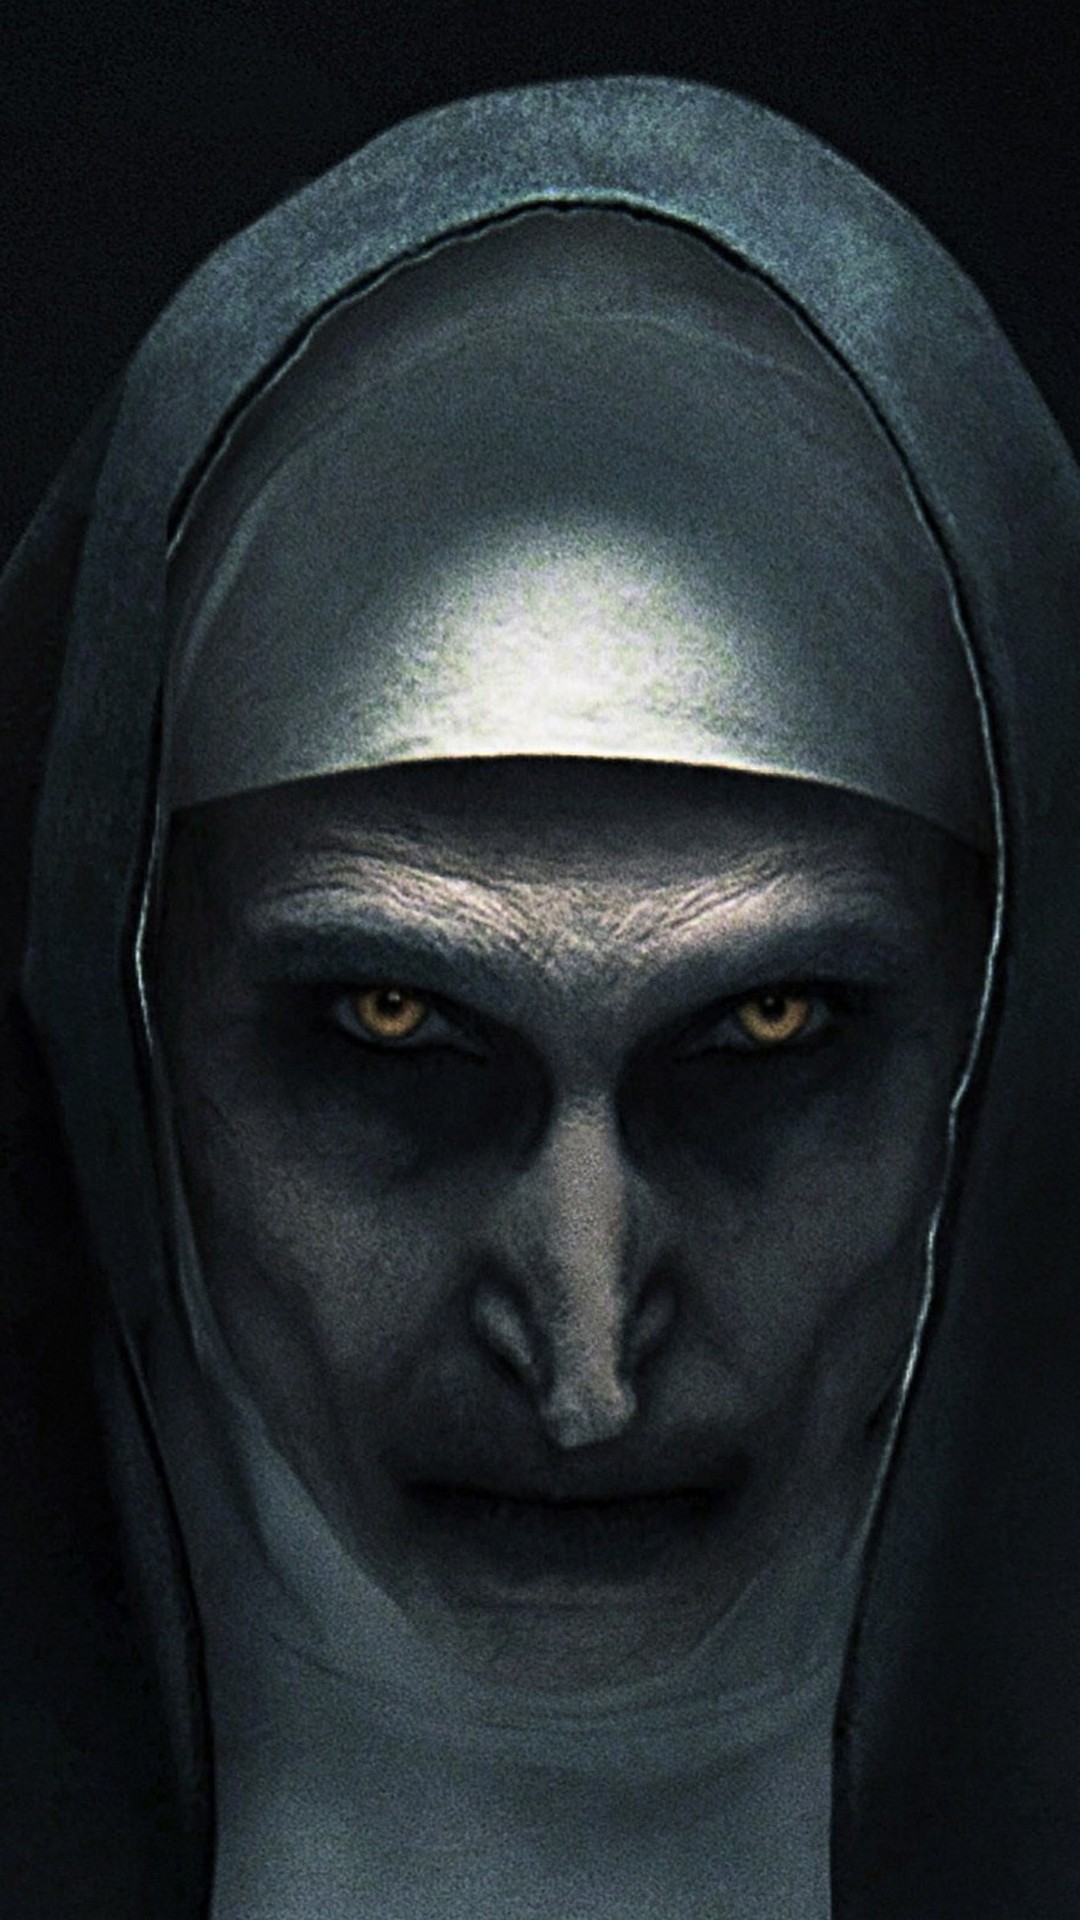 Wallpaper The Nun iPhone with resolution 1080X1920 pixel. You can make this wallpaper for your iPhone 5, 6, 7, 8, X backgrounds, Mobile Screensaver, or iPad Lock Screen